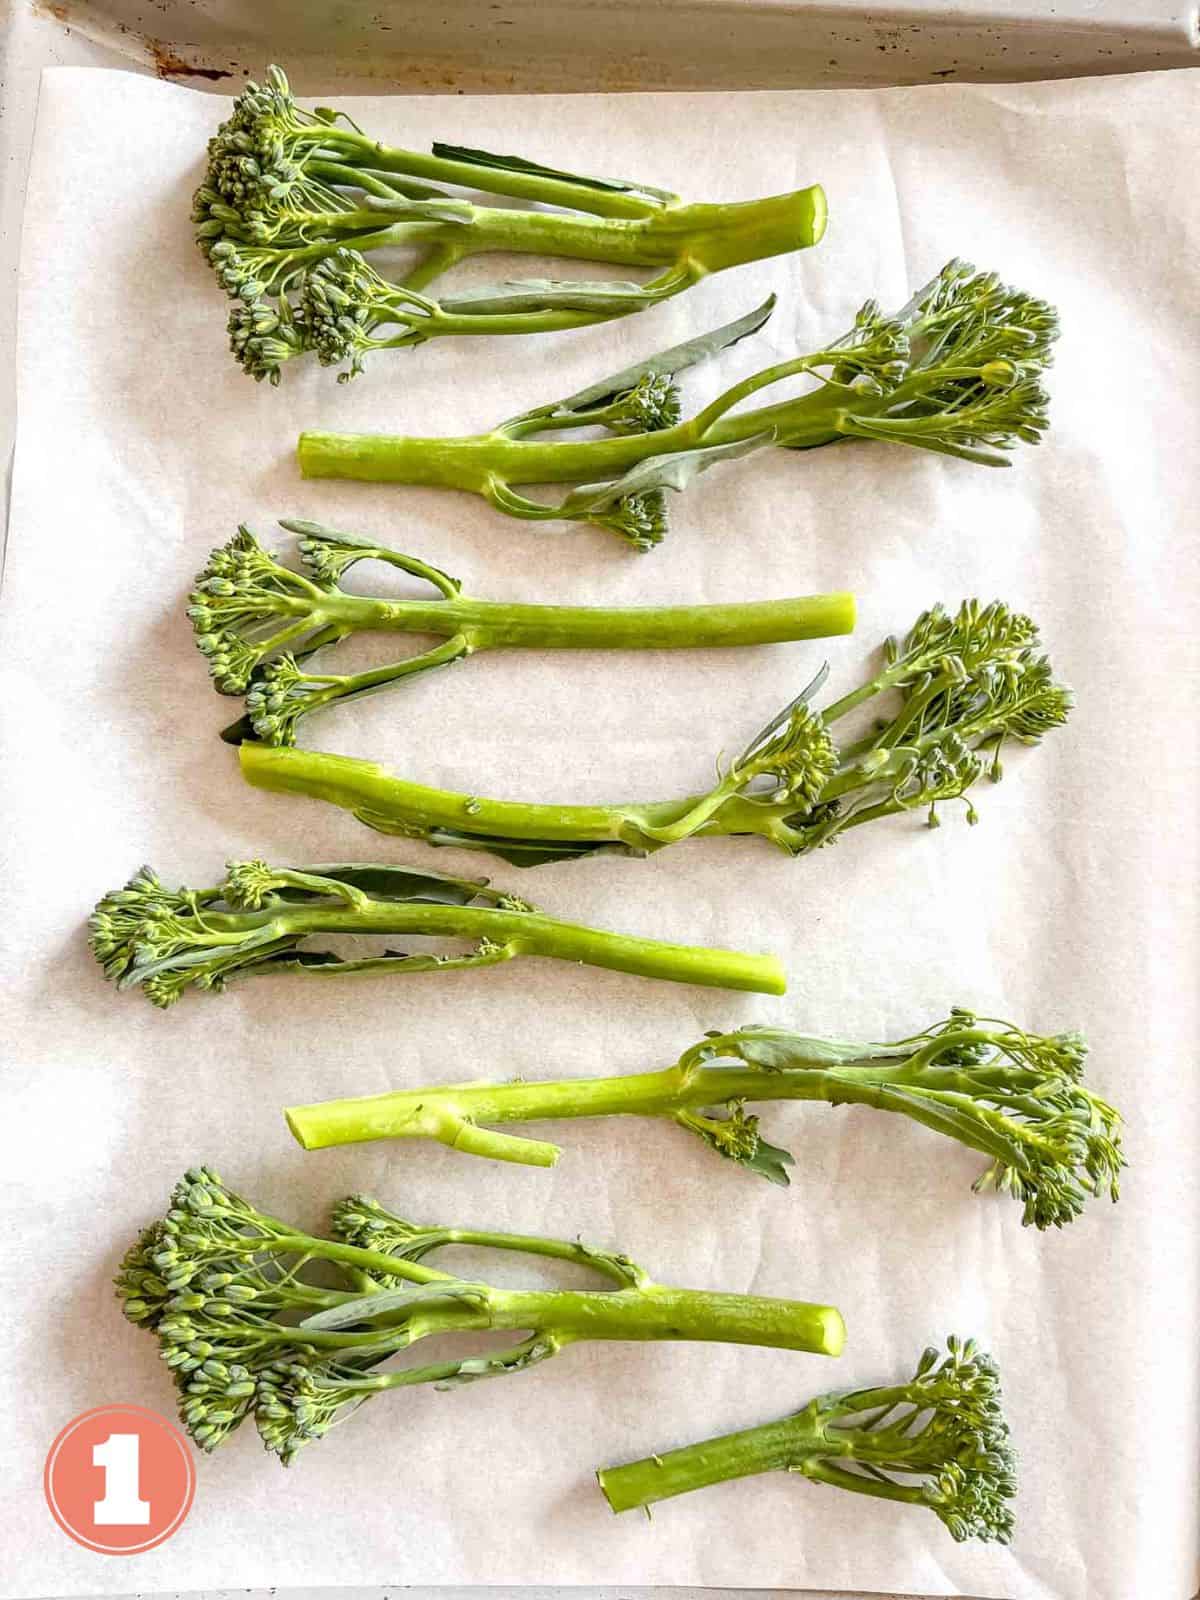 tenderstem broccoli stems on parchment paper on a baking sheet labelled number one.